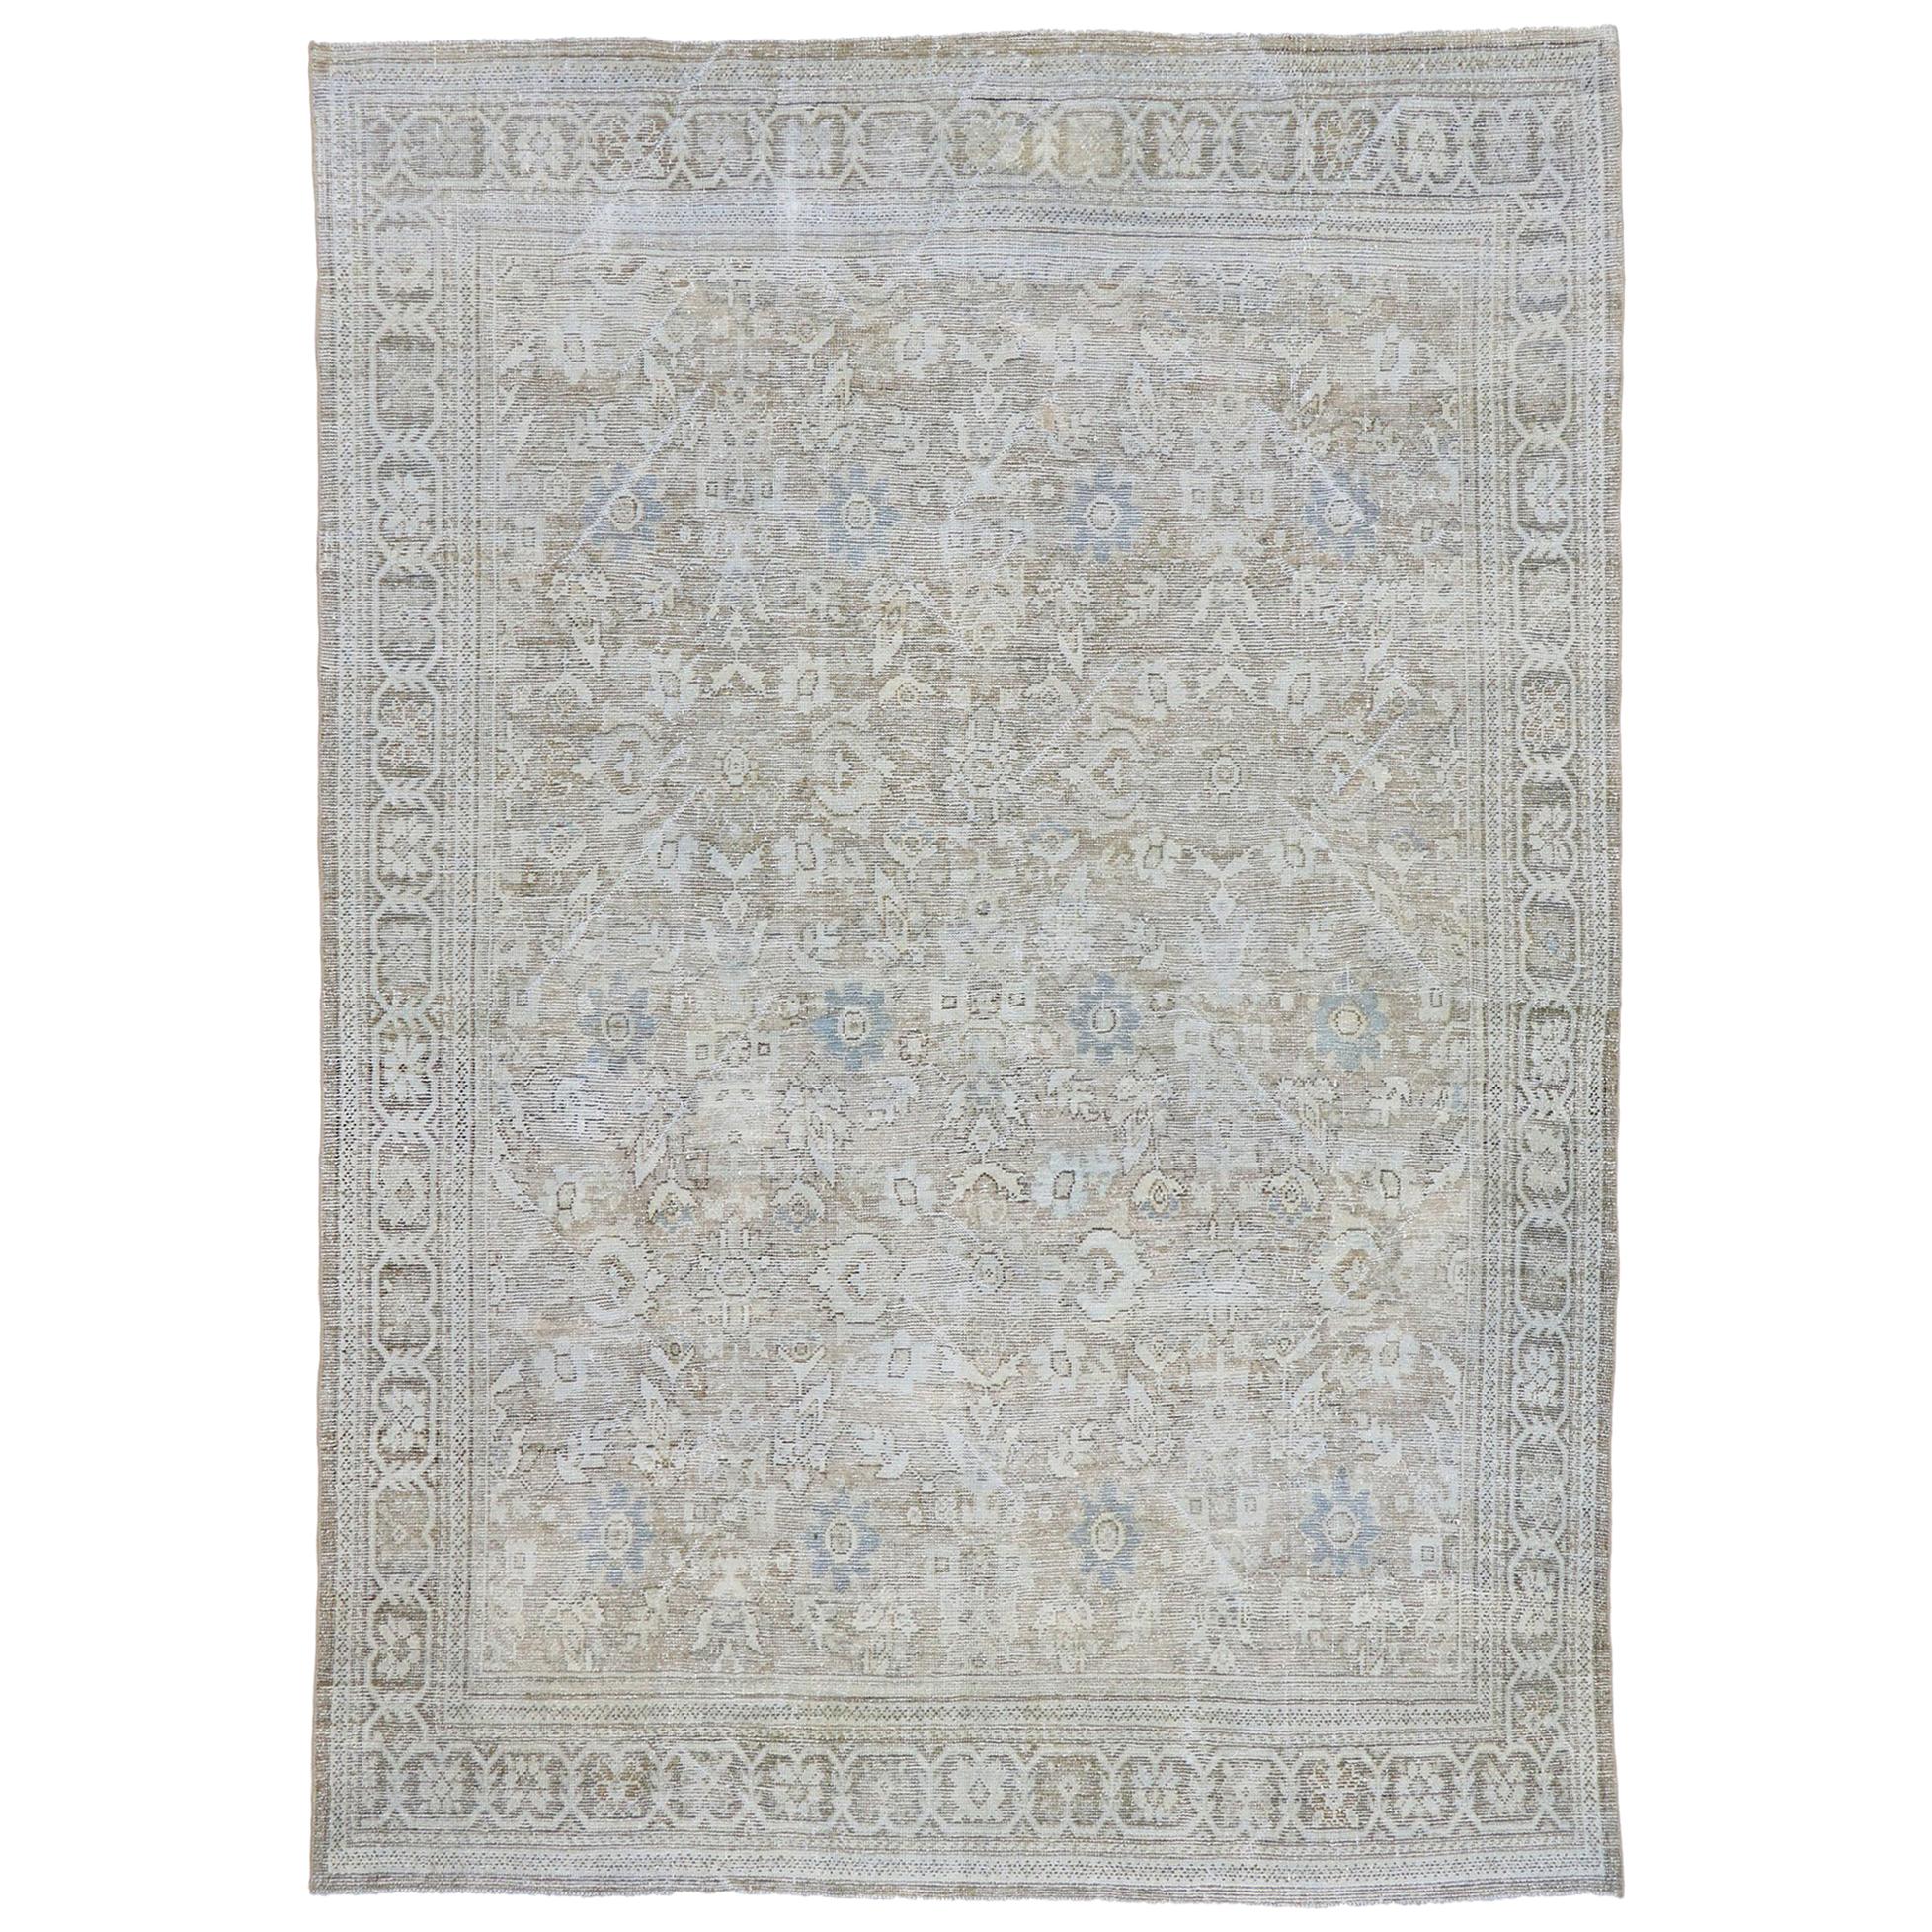 Distressed Vintage Persian Mahal Rug with Rustic Hamptons Cottage Style